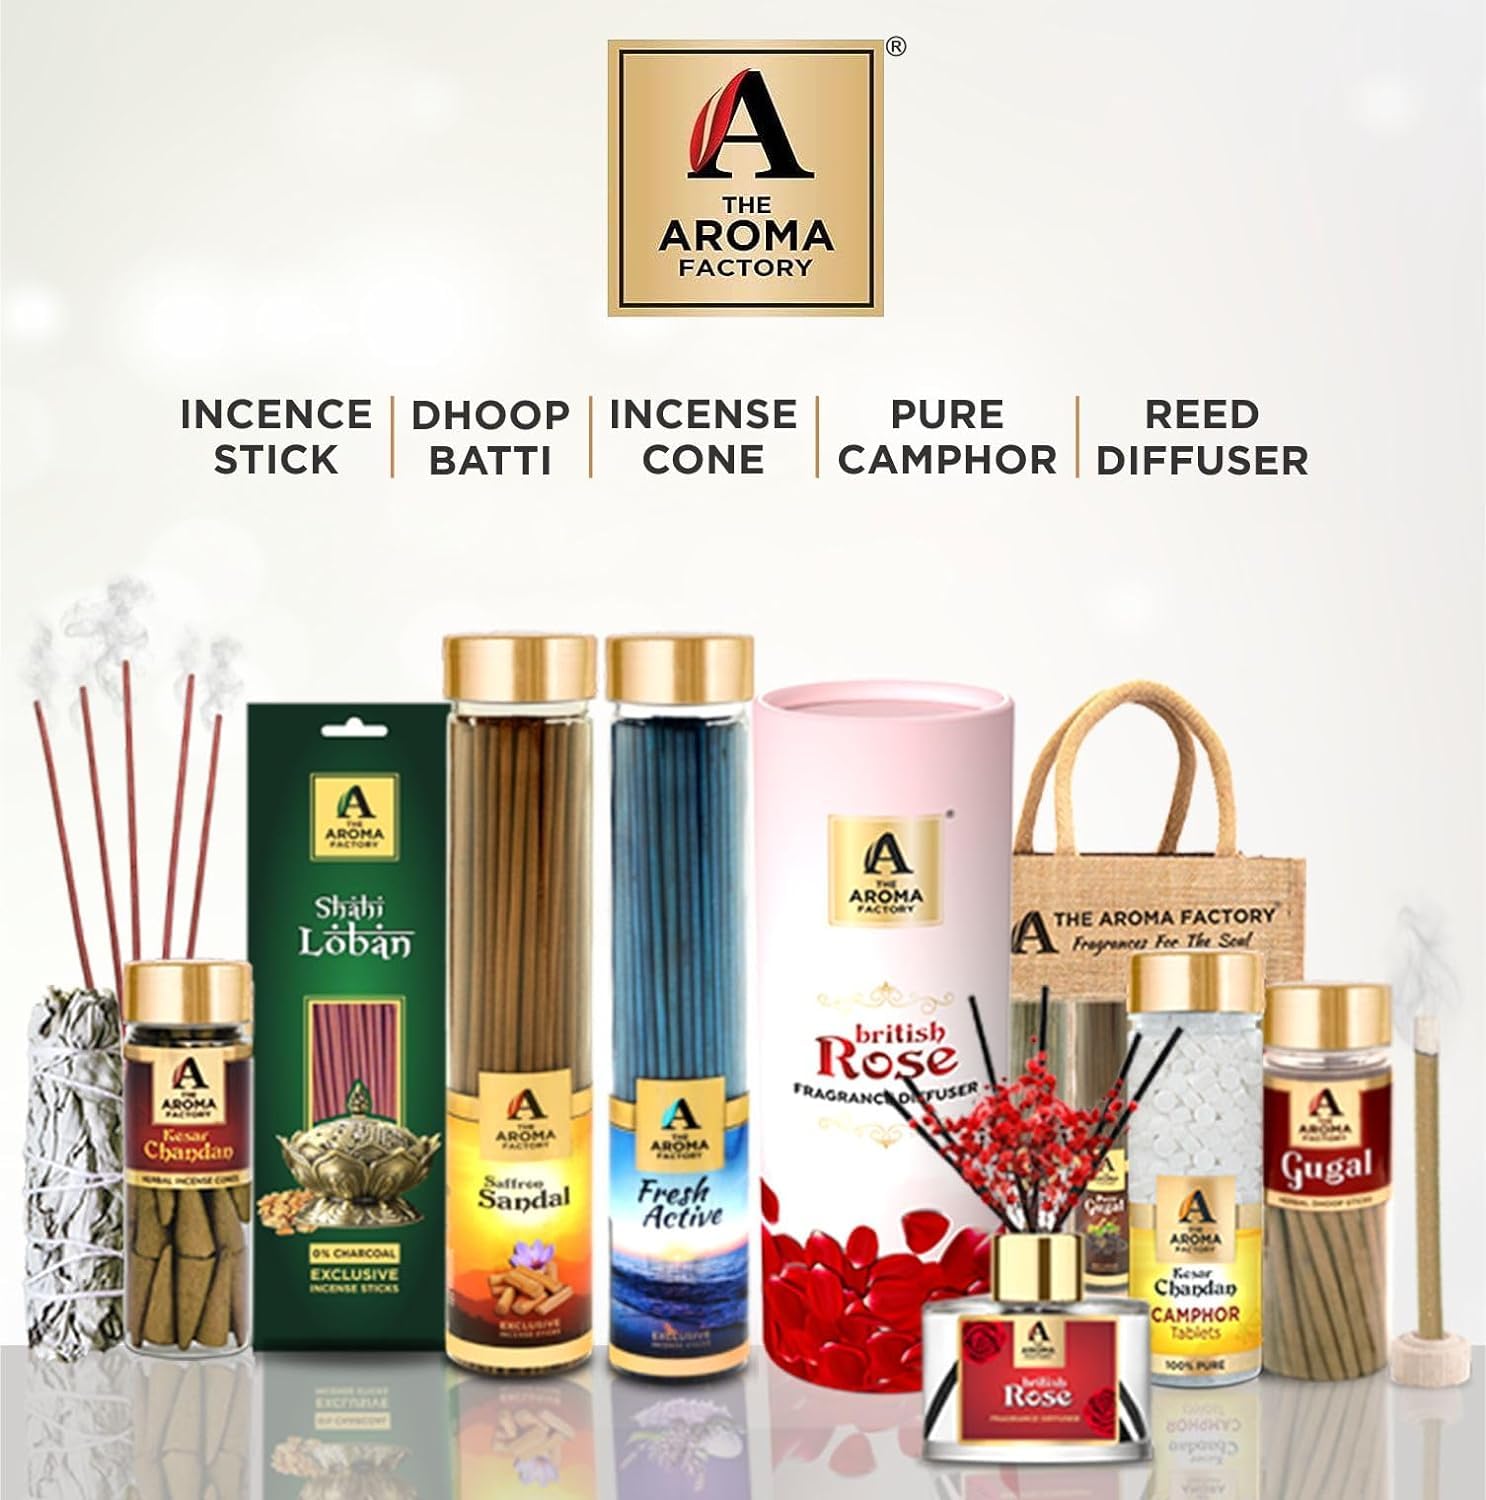 The Aroma Factory Happy Birthday Aunty Gift with Card (25 Swad Candy, Strawberry Agarbatti Bottle, Rose Cone) in Jute Bag